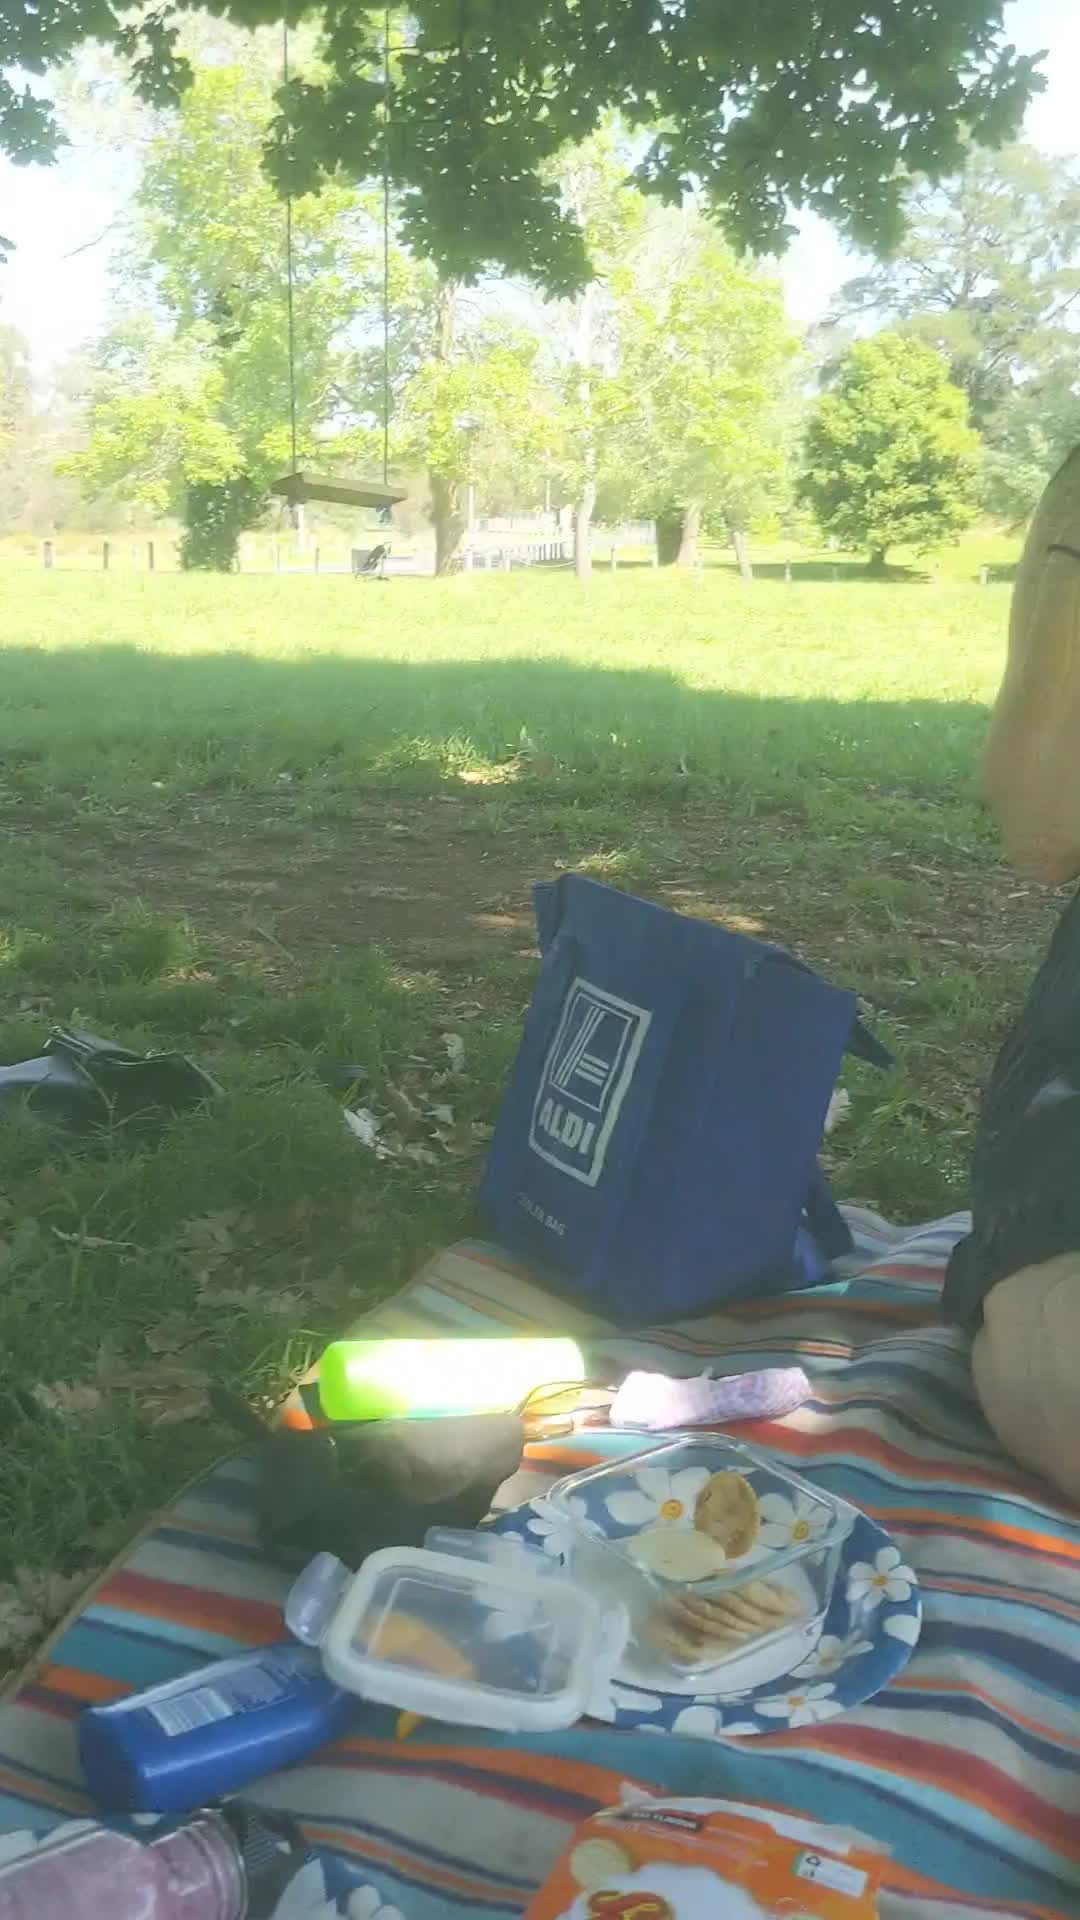 Nervous laughter while flashing in the park